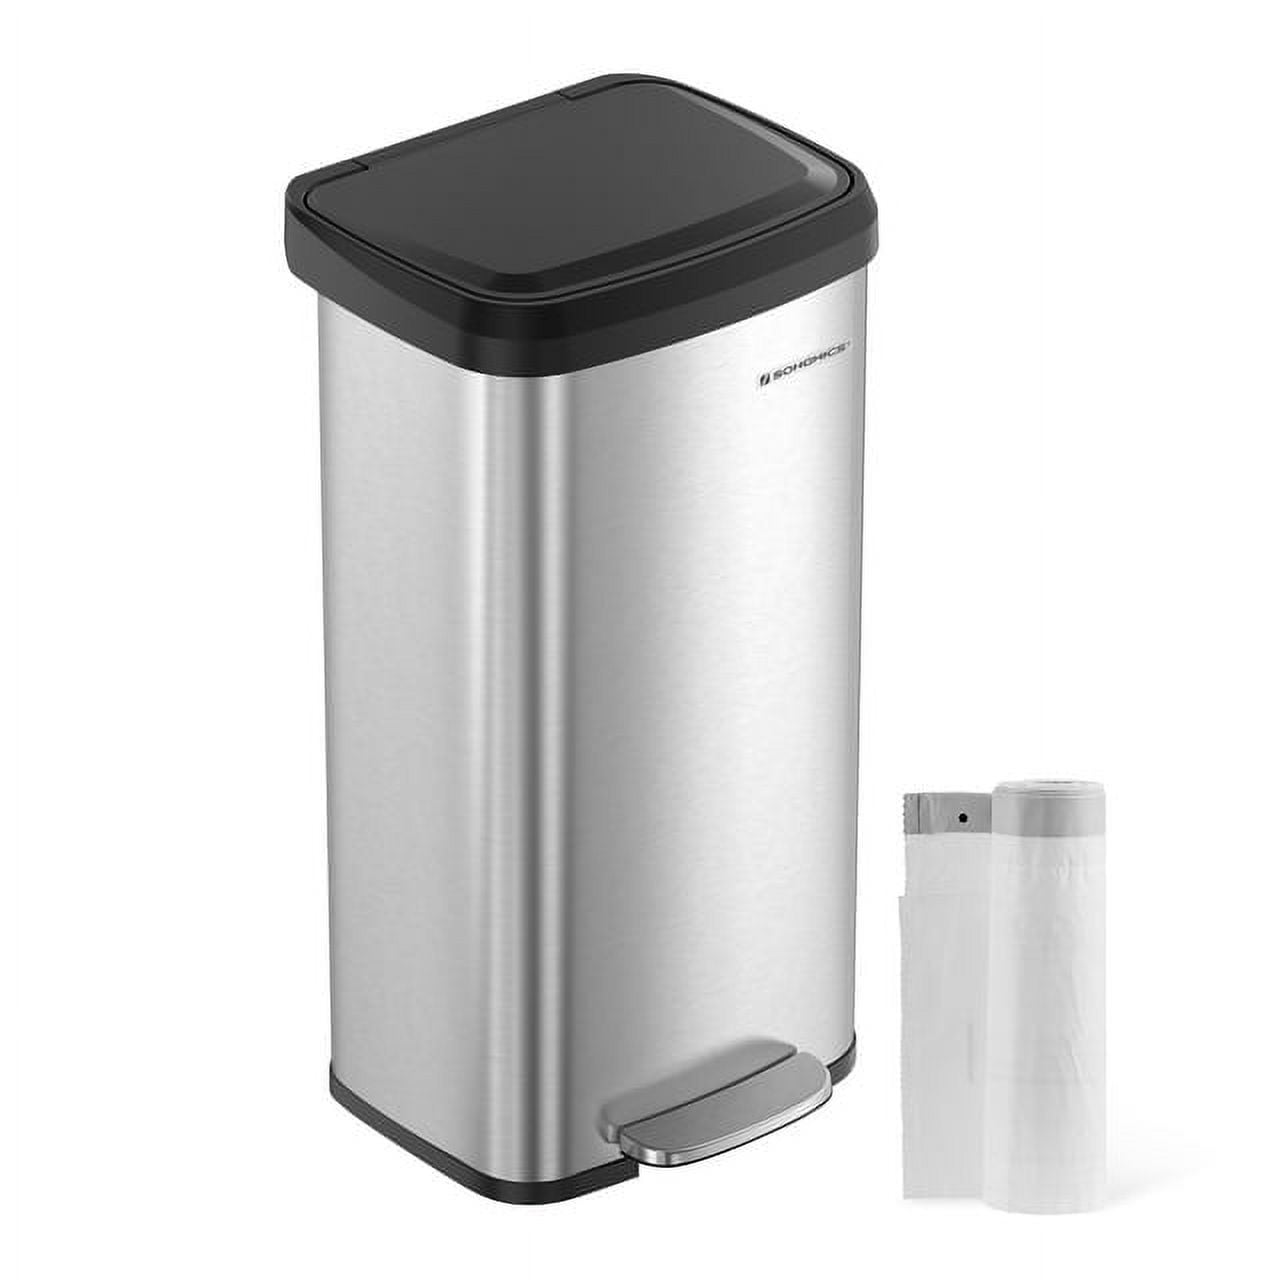  SONGMICS Kitchen Trash Can, 13-Gallon Stainless Steel Garbage  Can, with Stay-Open Lid and Step-on Pedal, Soft Closure, Tall, Large and  Space-Saving, Black ULTB530B50 : Home & Kitchen